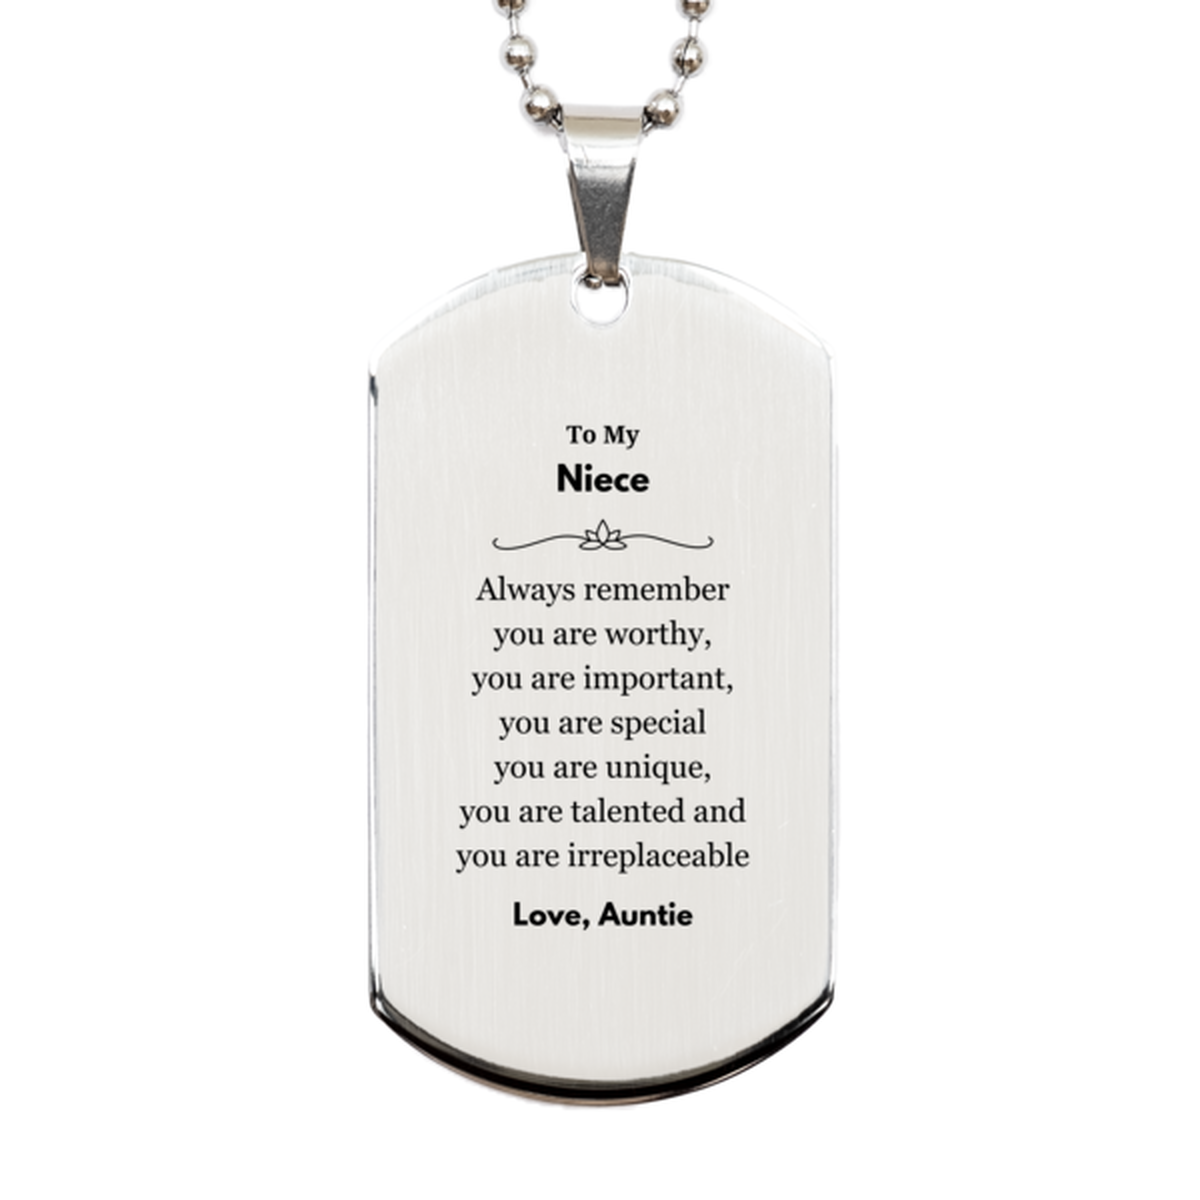 Niece Birthday Gifts from Auntie, Inspirational Silver Dog Tag for Niece Christmas Graduation Gifts for Niece Always remember you are worthy, you are important. Love, Auntie